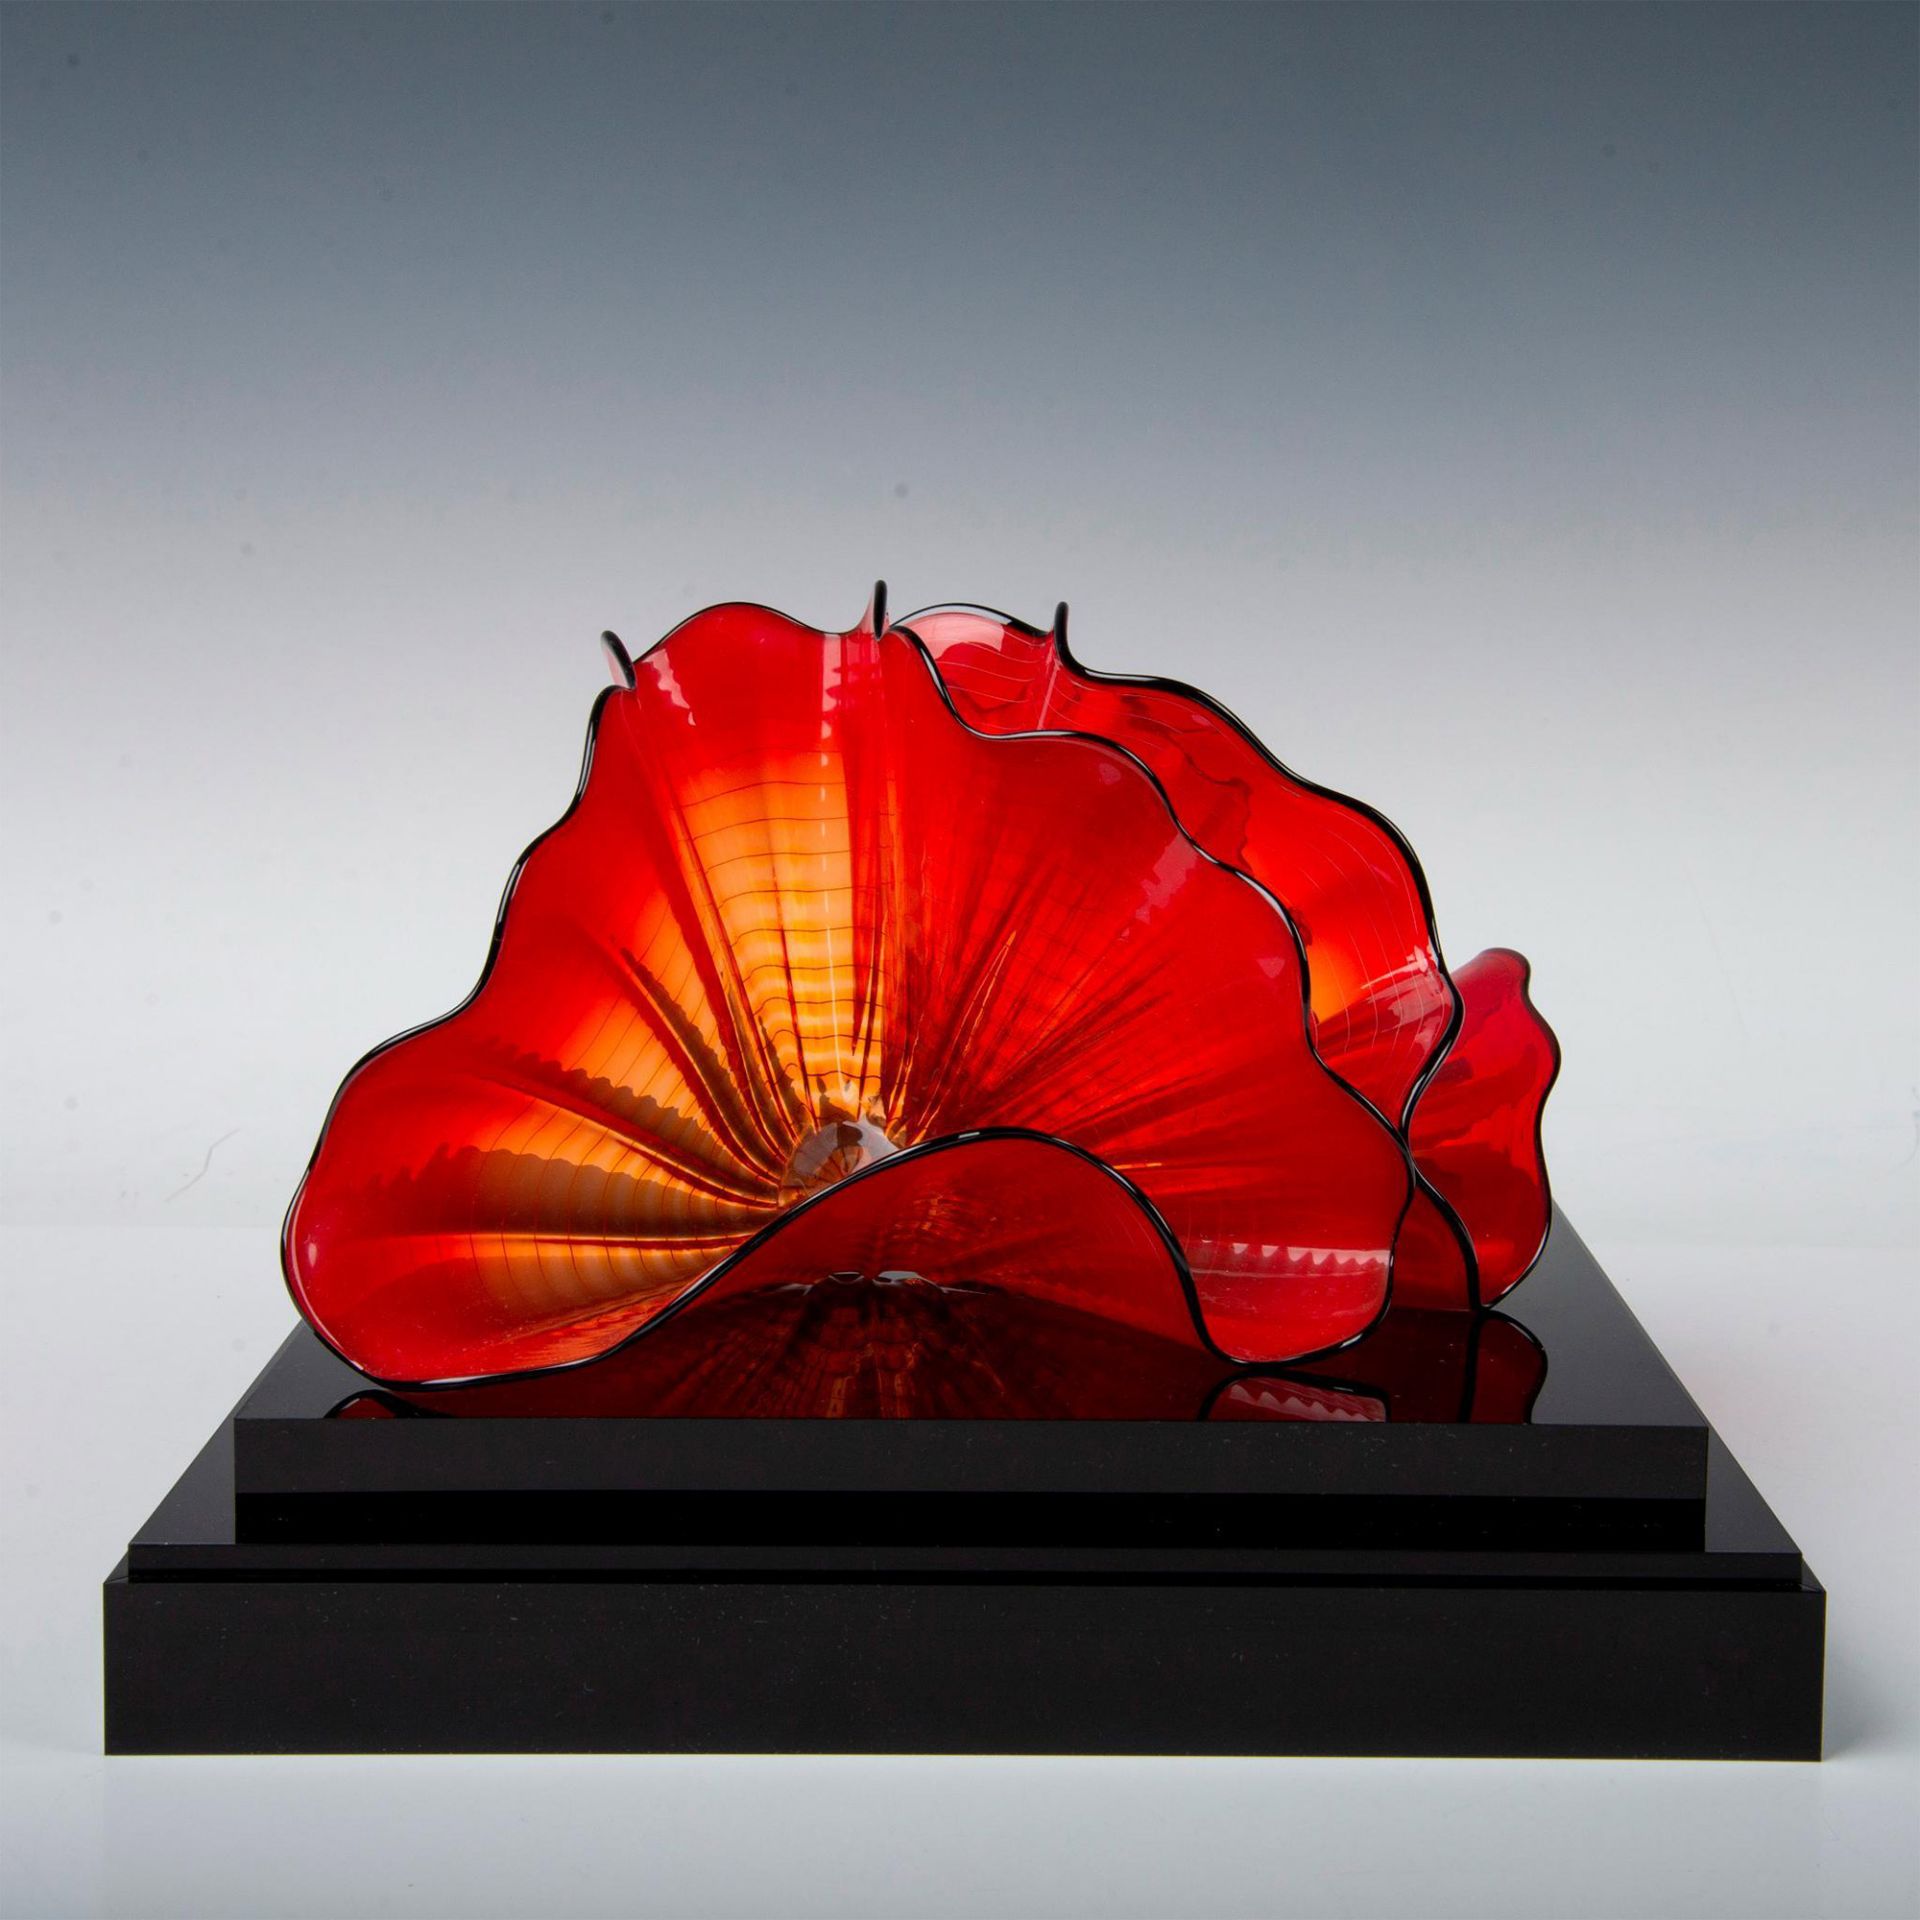 Dale Chihuly Portland Press Art Glass, Red Amber Persian Pair - Image 7 of 20